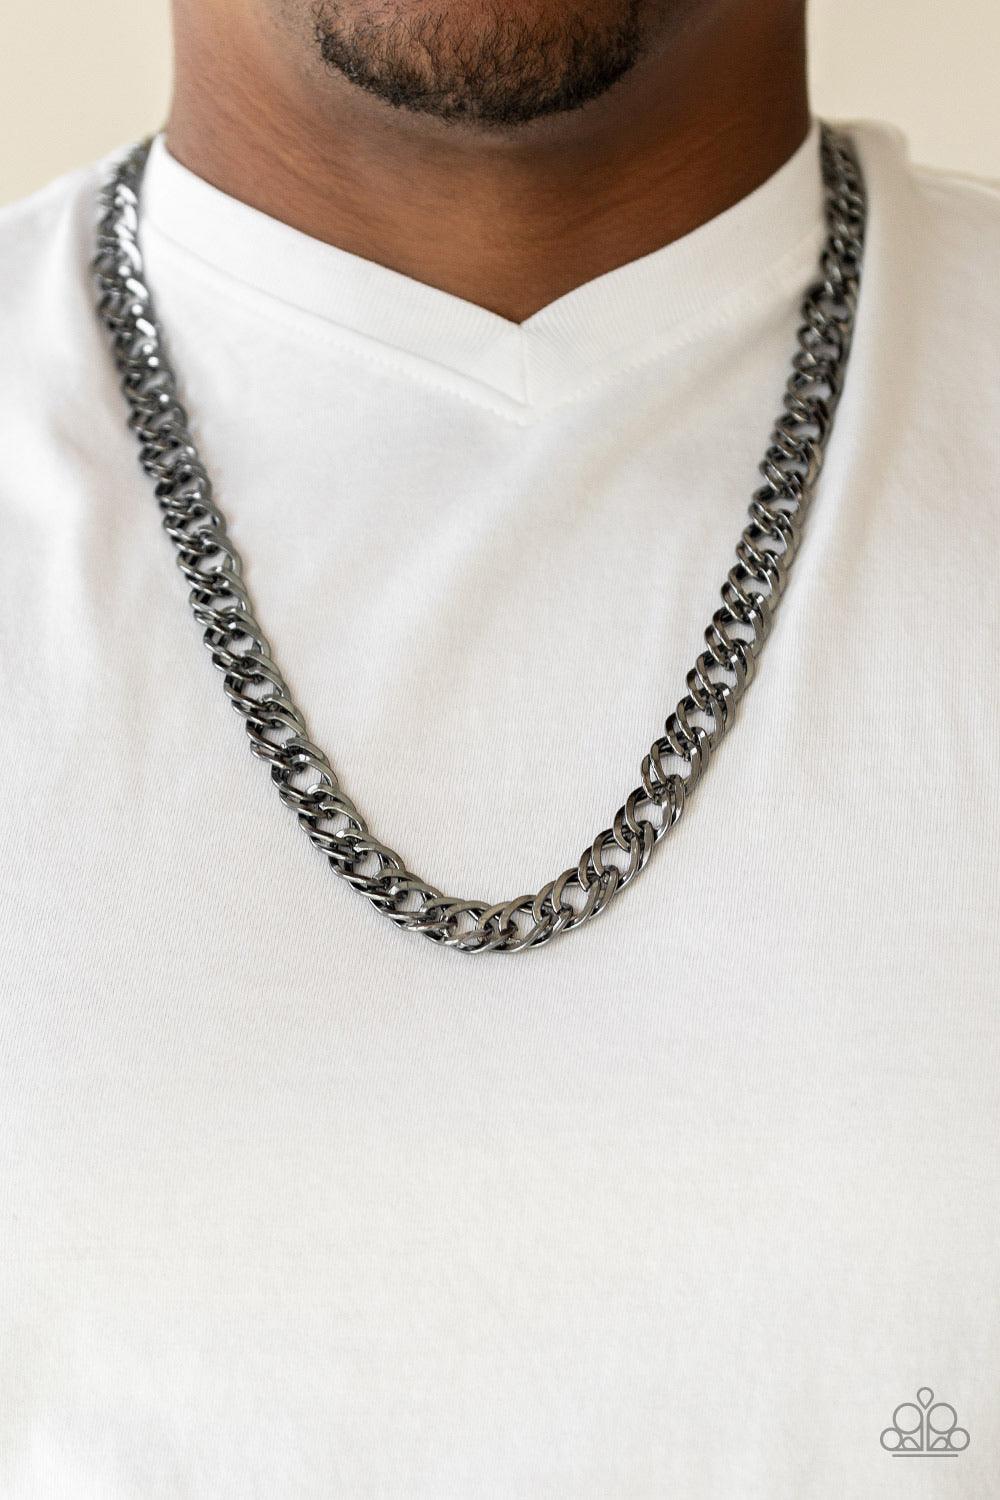 Paparazzi Accessories Undefeated - Black Featuring doubled links, a glistening gunmetal chain drapes across the chest for a bold look. Features an adjustable clasp closure. Sold as one individual necklace. Jewelry